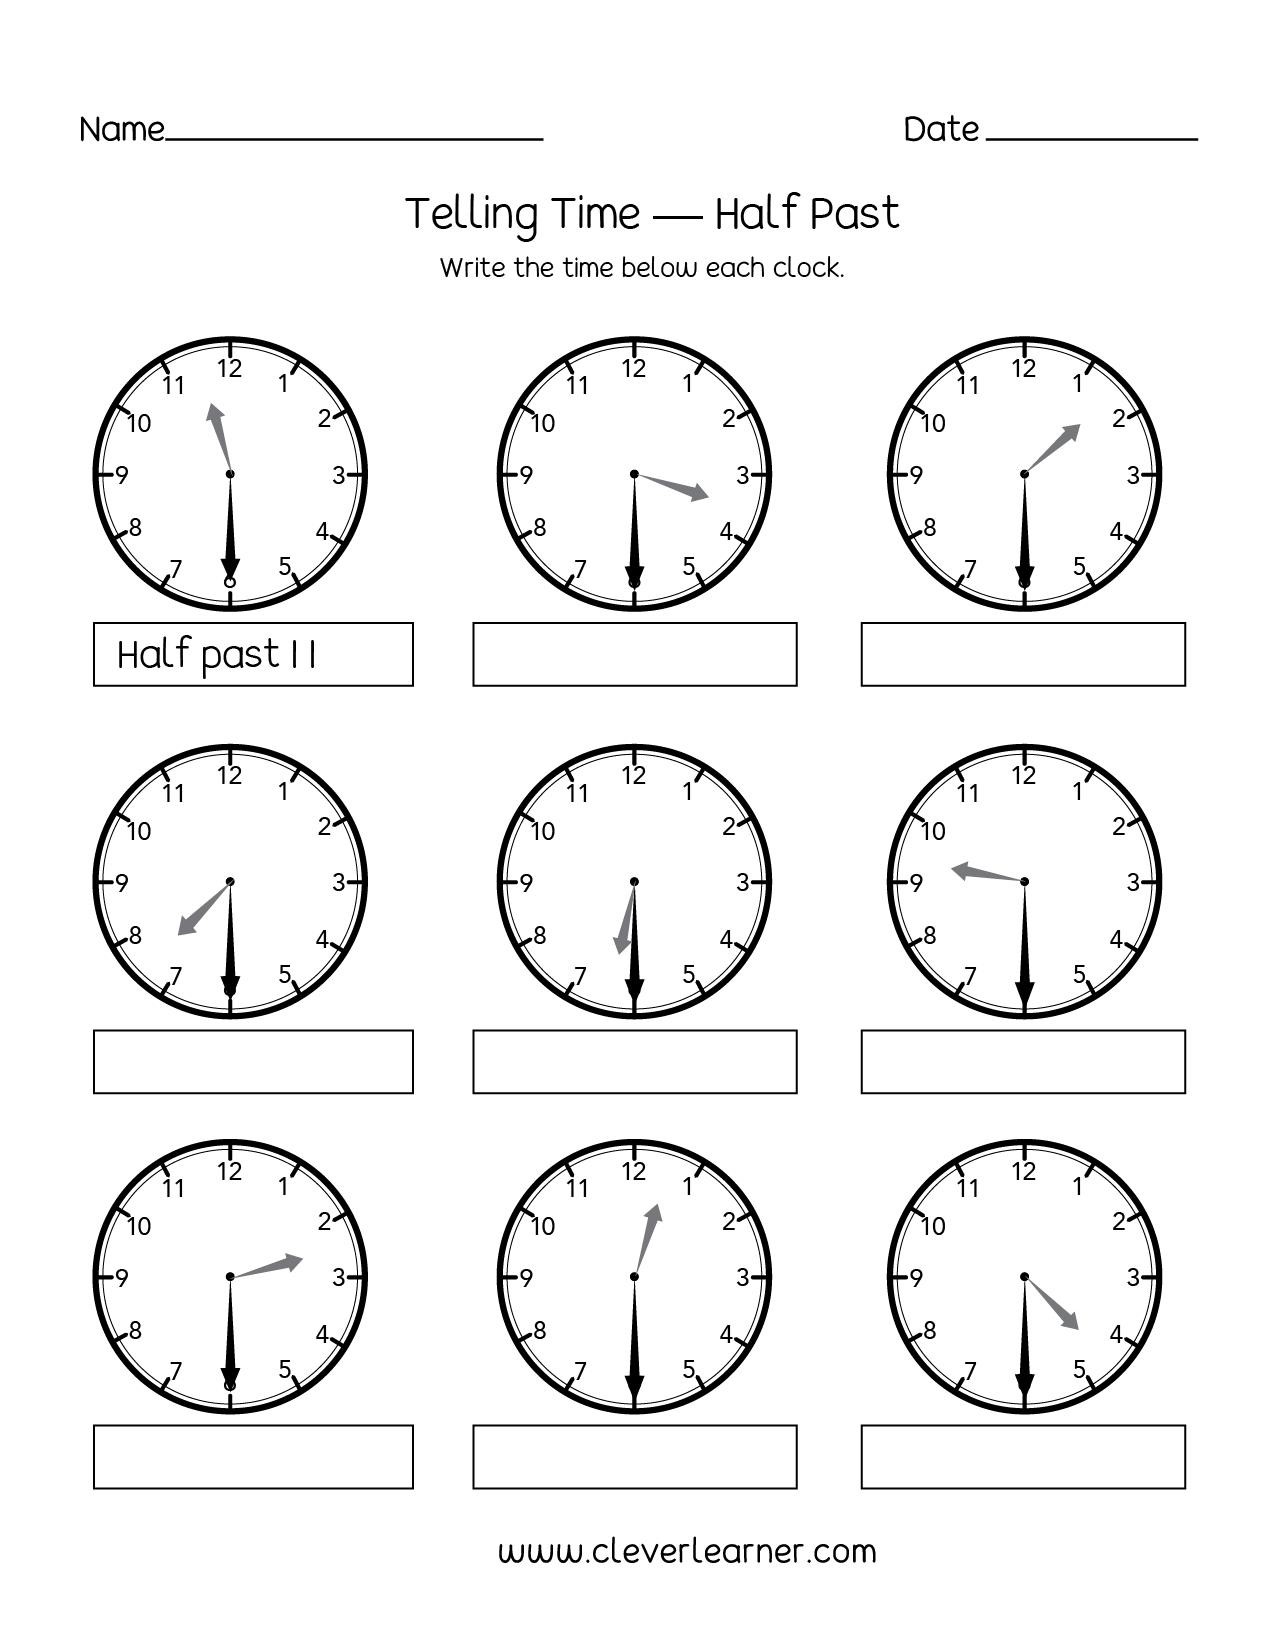 telling-time-to-the-half-hour-worksheets-db-excel